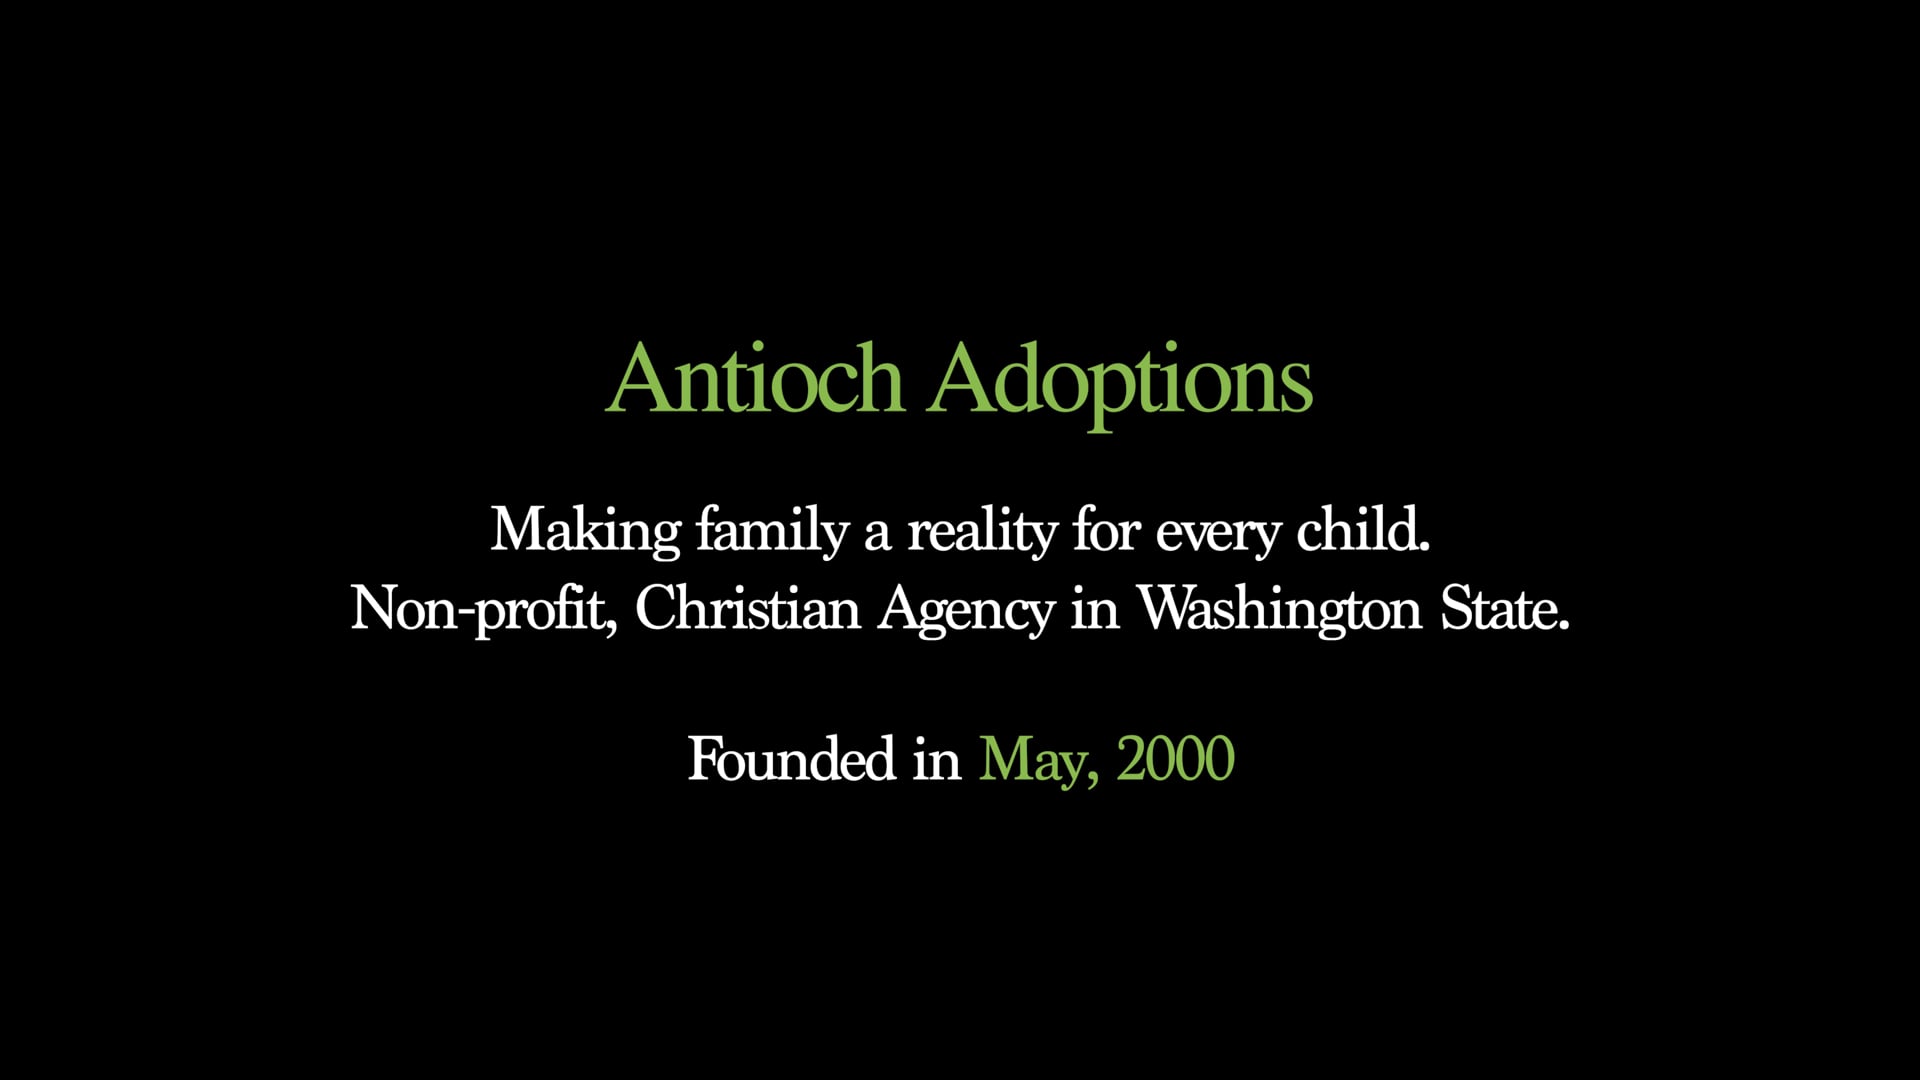 Antioch Adoptions - Relive the Miracle